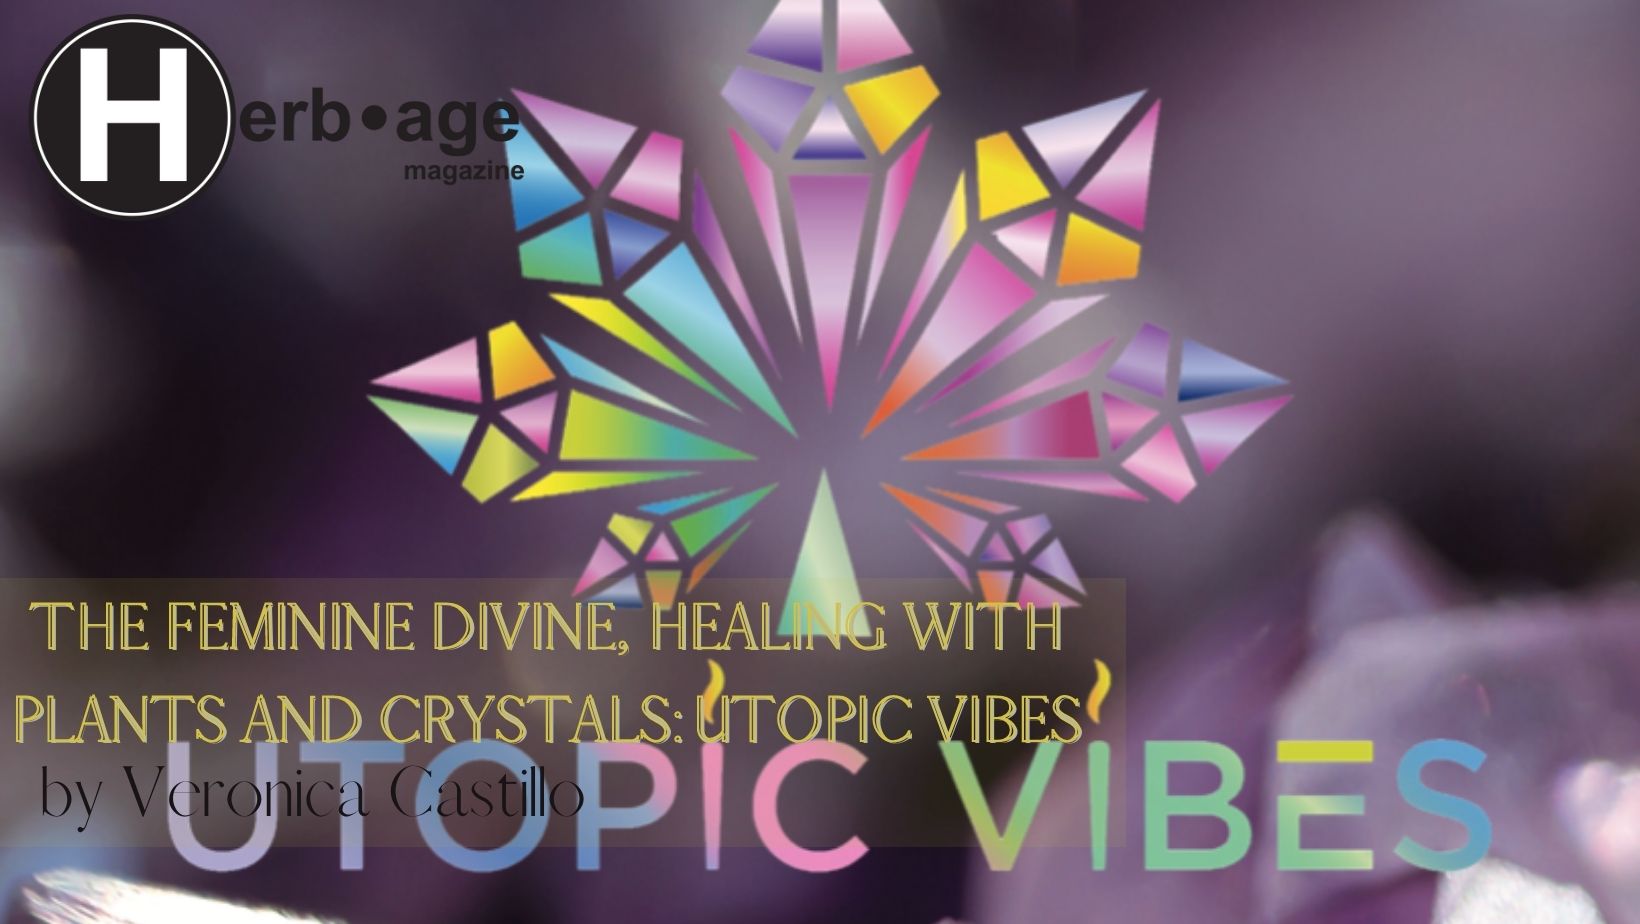 The Feminine Divine, Healing with Plants and Crystals: Utopic Vibes